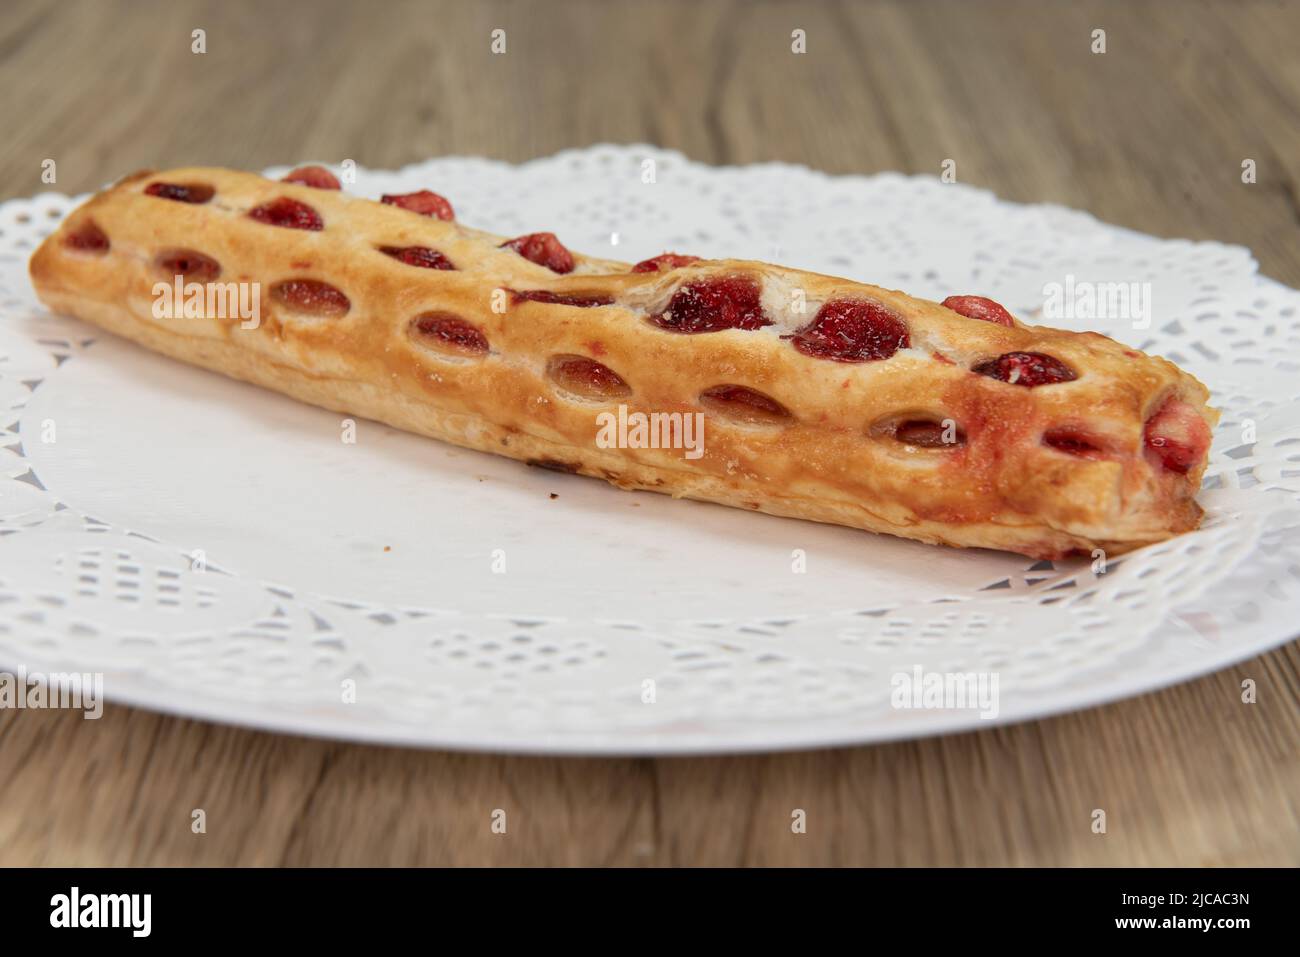 Tempting fresh from the oven strawberry strudel from the bakery served on a plate. Stock Photo